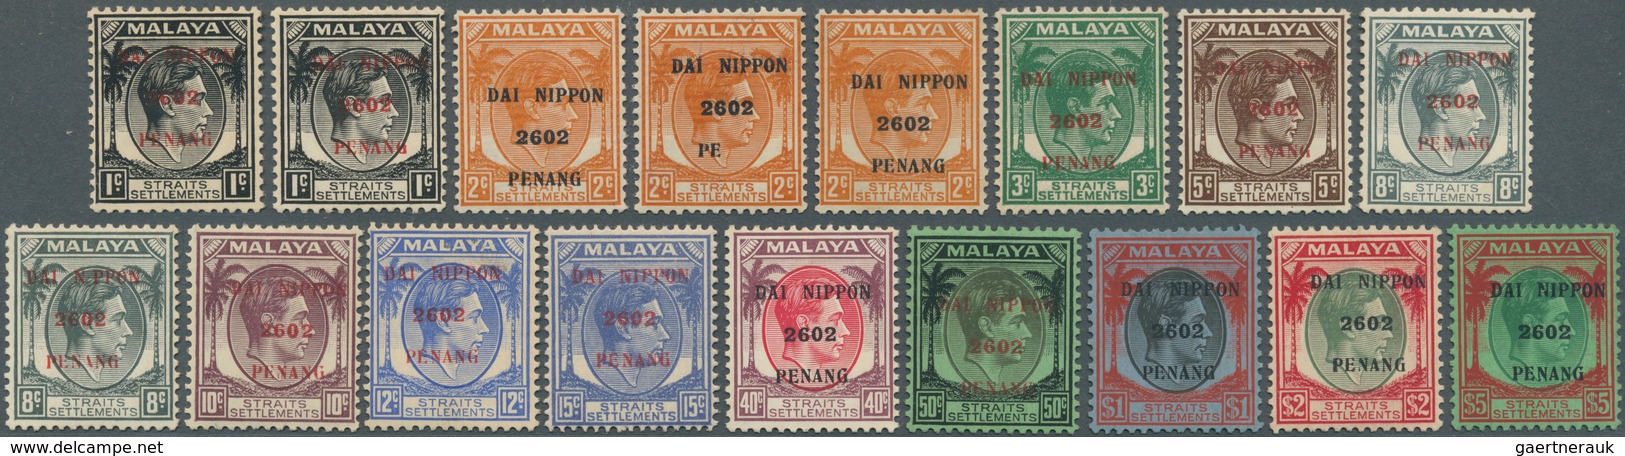 Malaiische Staaten - Penang: Japanese Occupation, 1942, 1 C.-$5 Cpl. Set, Unused Mounted Mint. Addit - Penang